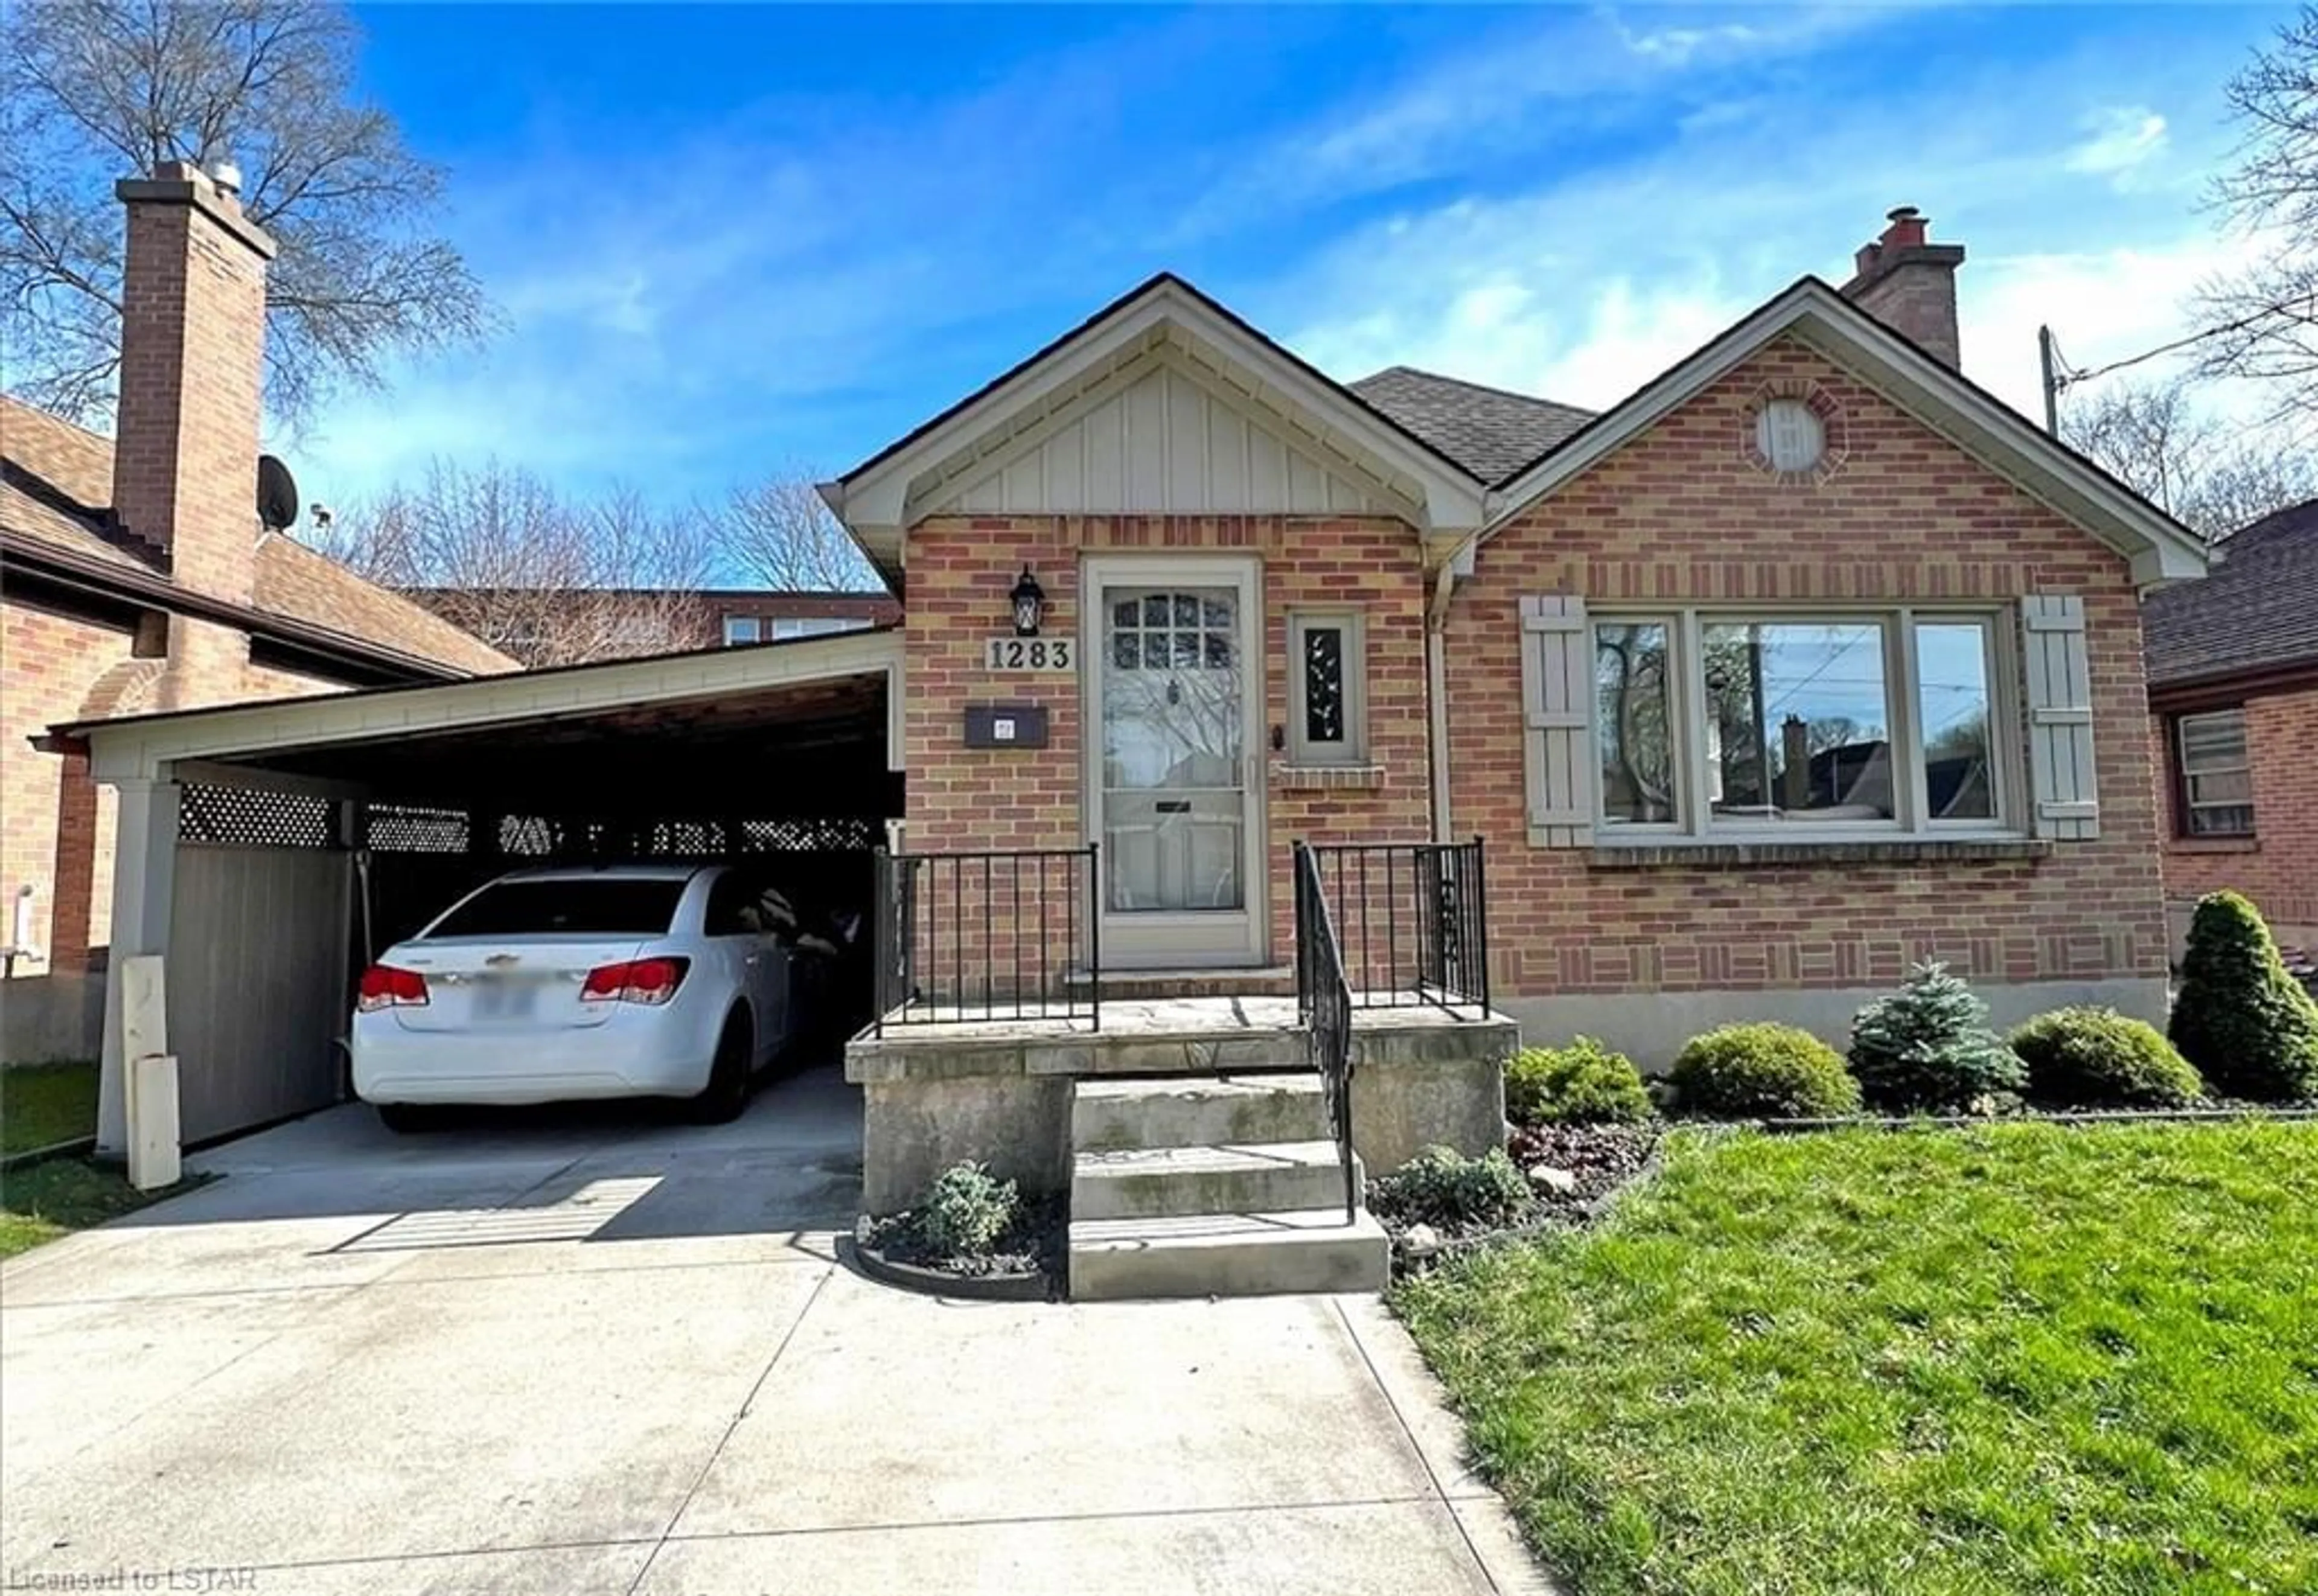 Home with brick exterior material for 1283 Langmuir Ave, London Ontario N5W 2G4